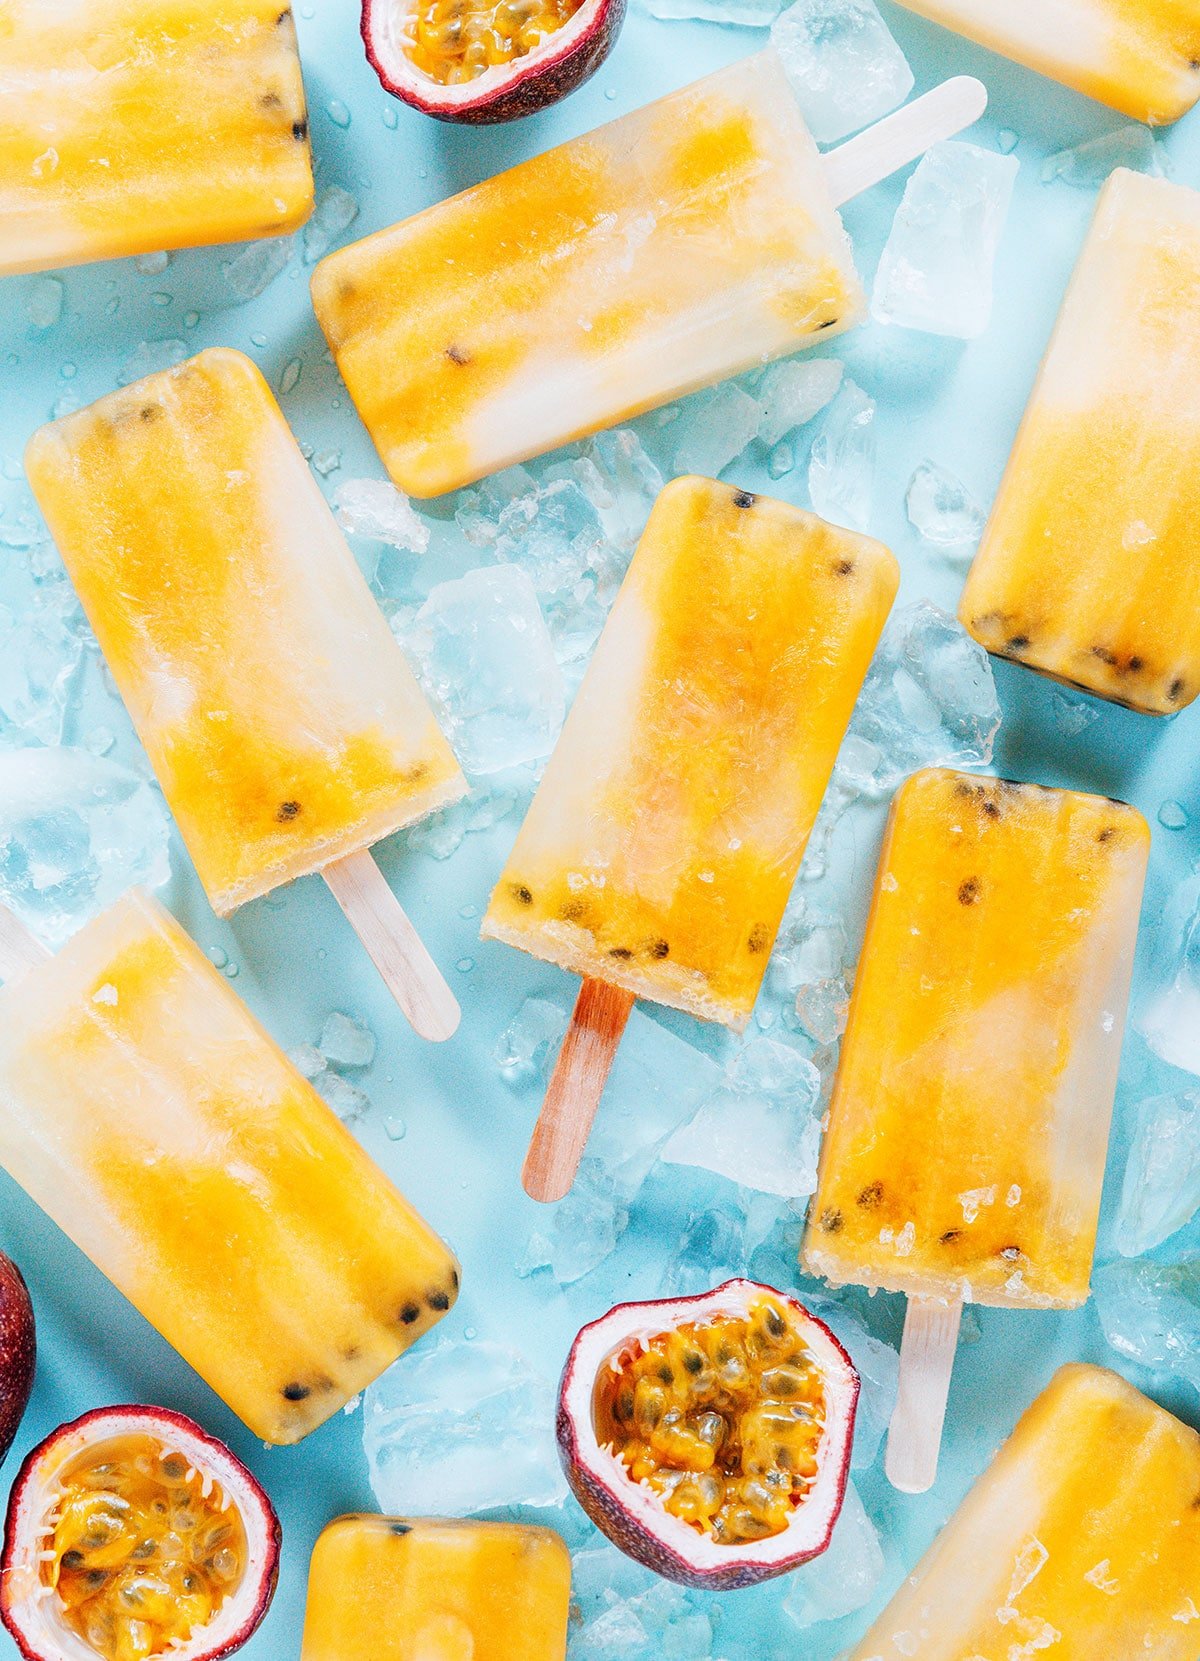 Popsicles, ice, and cut open passion fruit laid flat on a blue background.